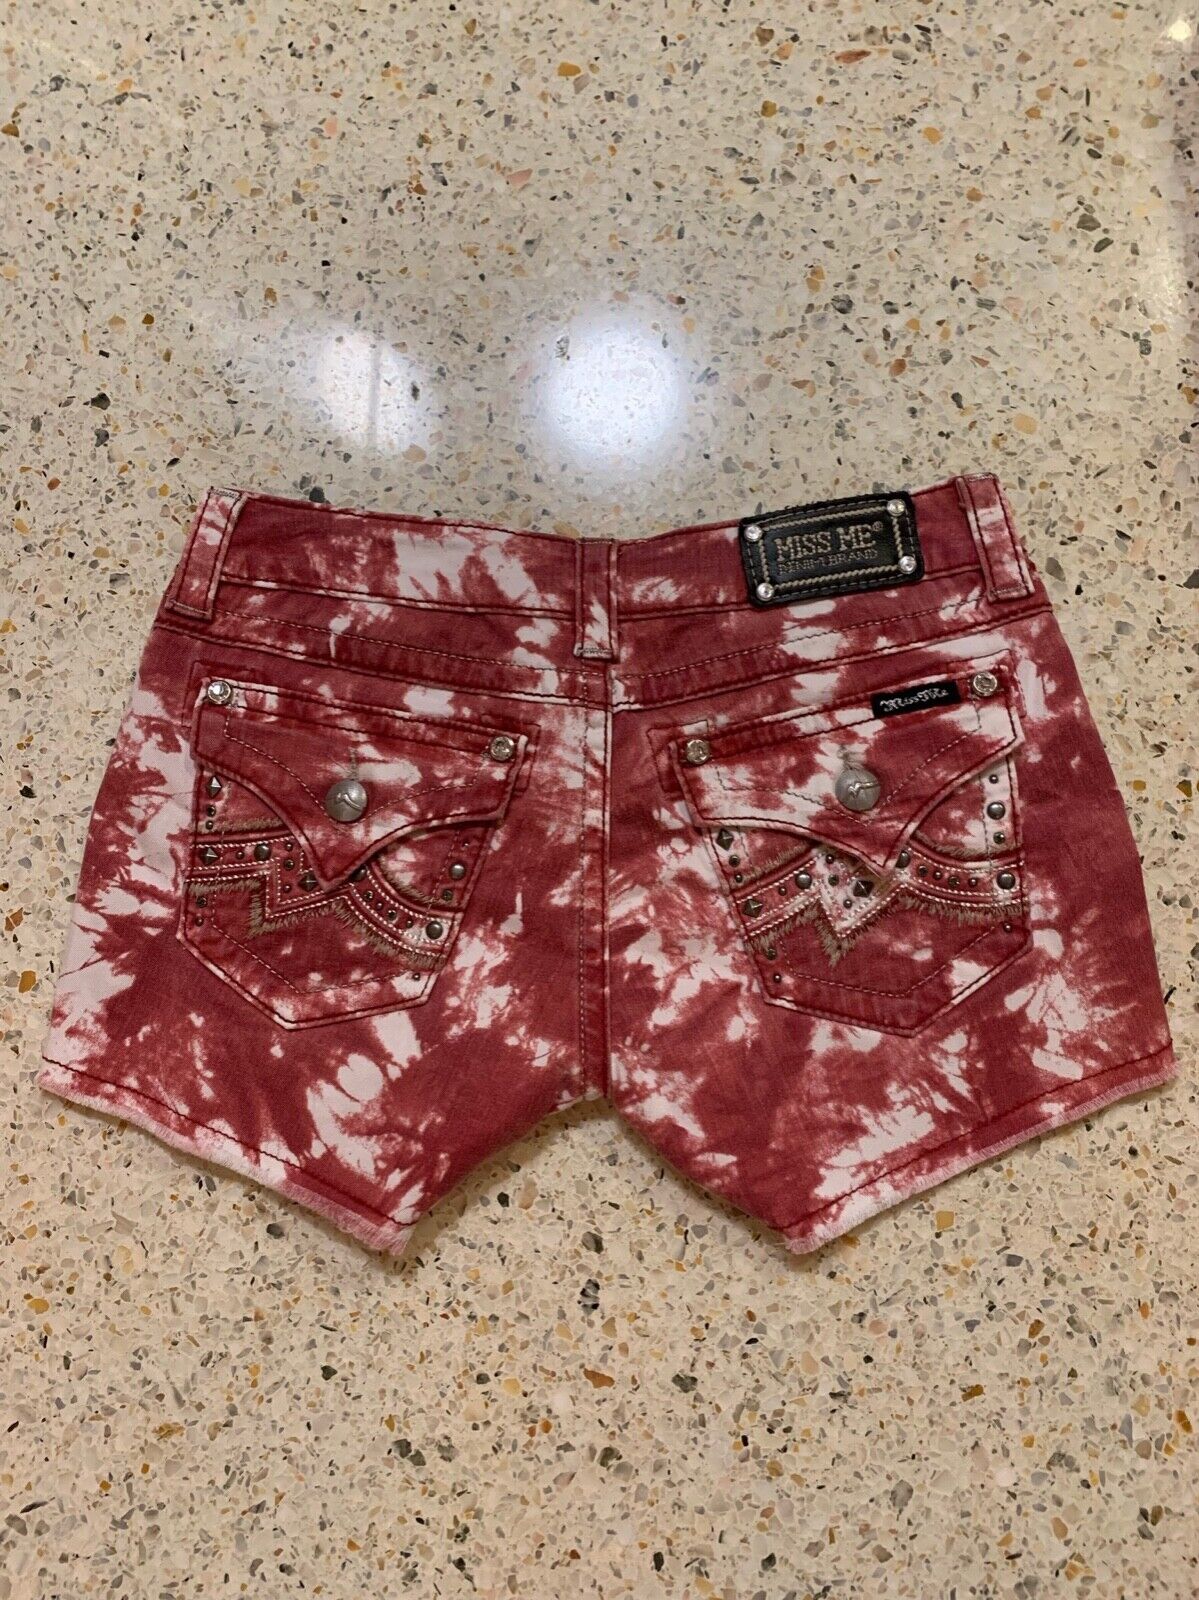 MISS ME RED TIE DYE SHORTS BLING FP BK PKTS TAG 2… - image 11